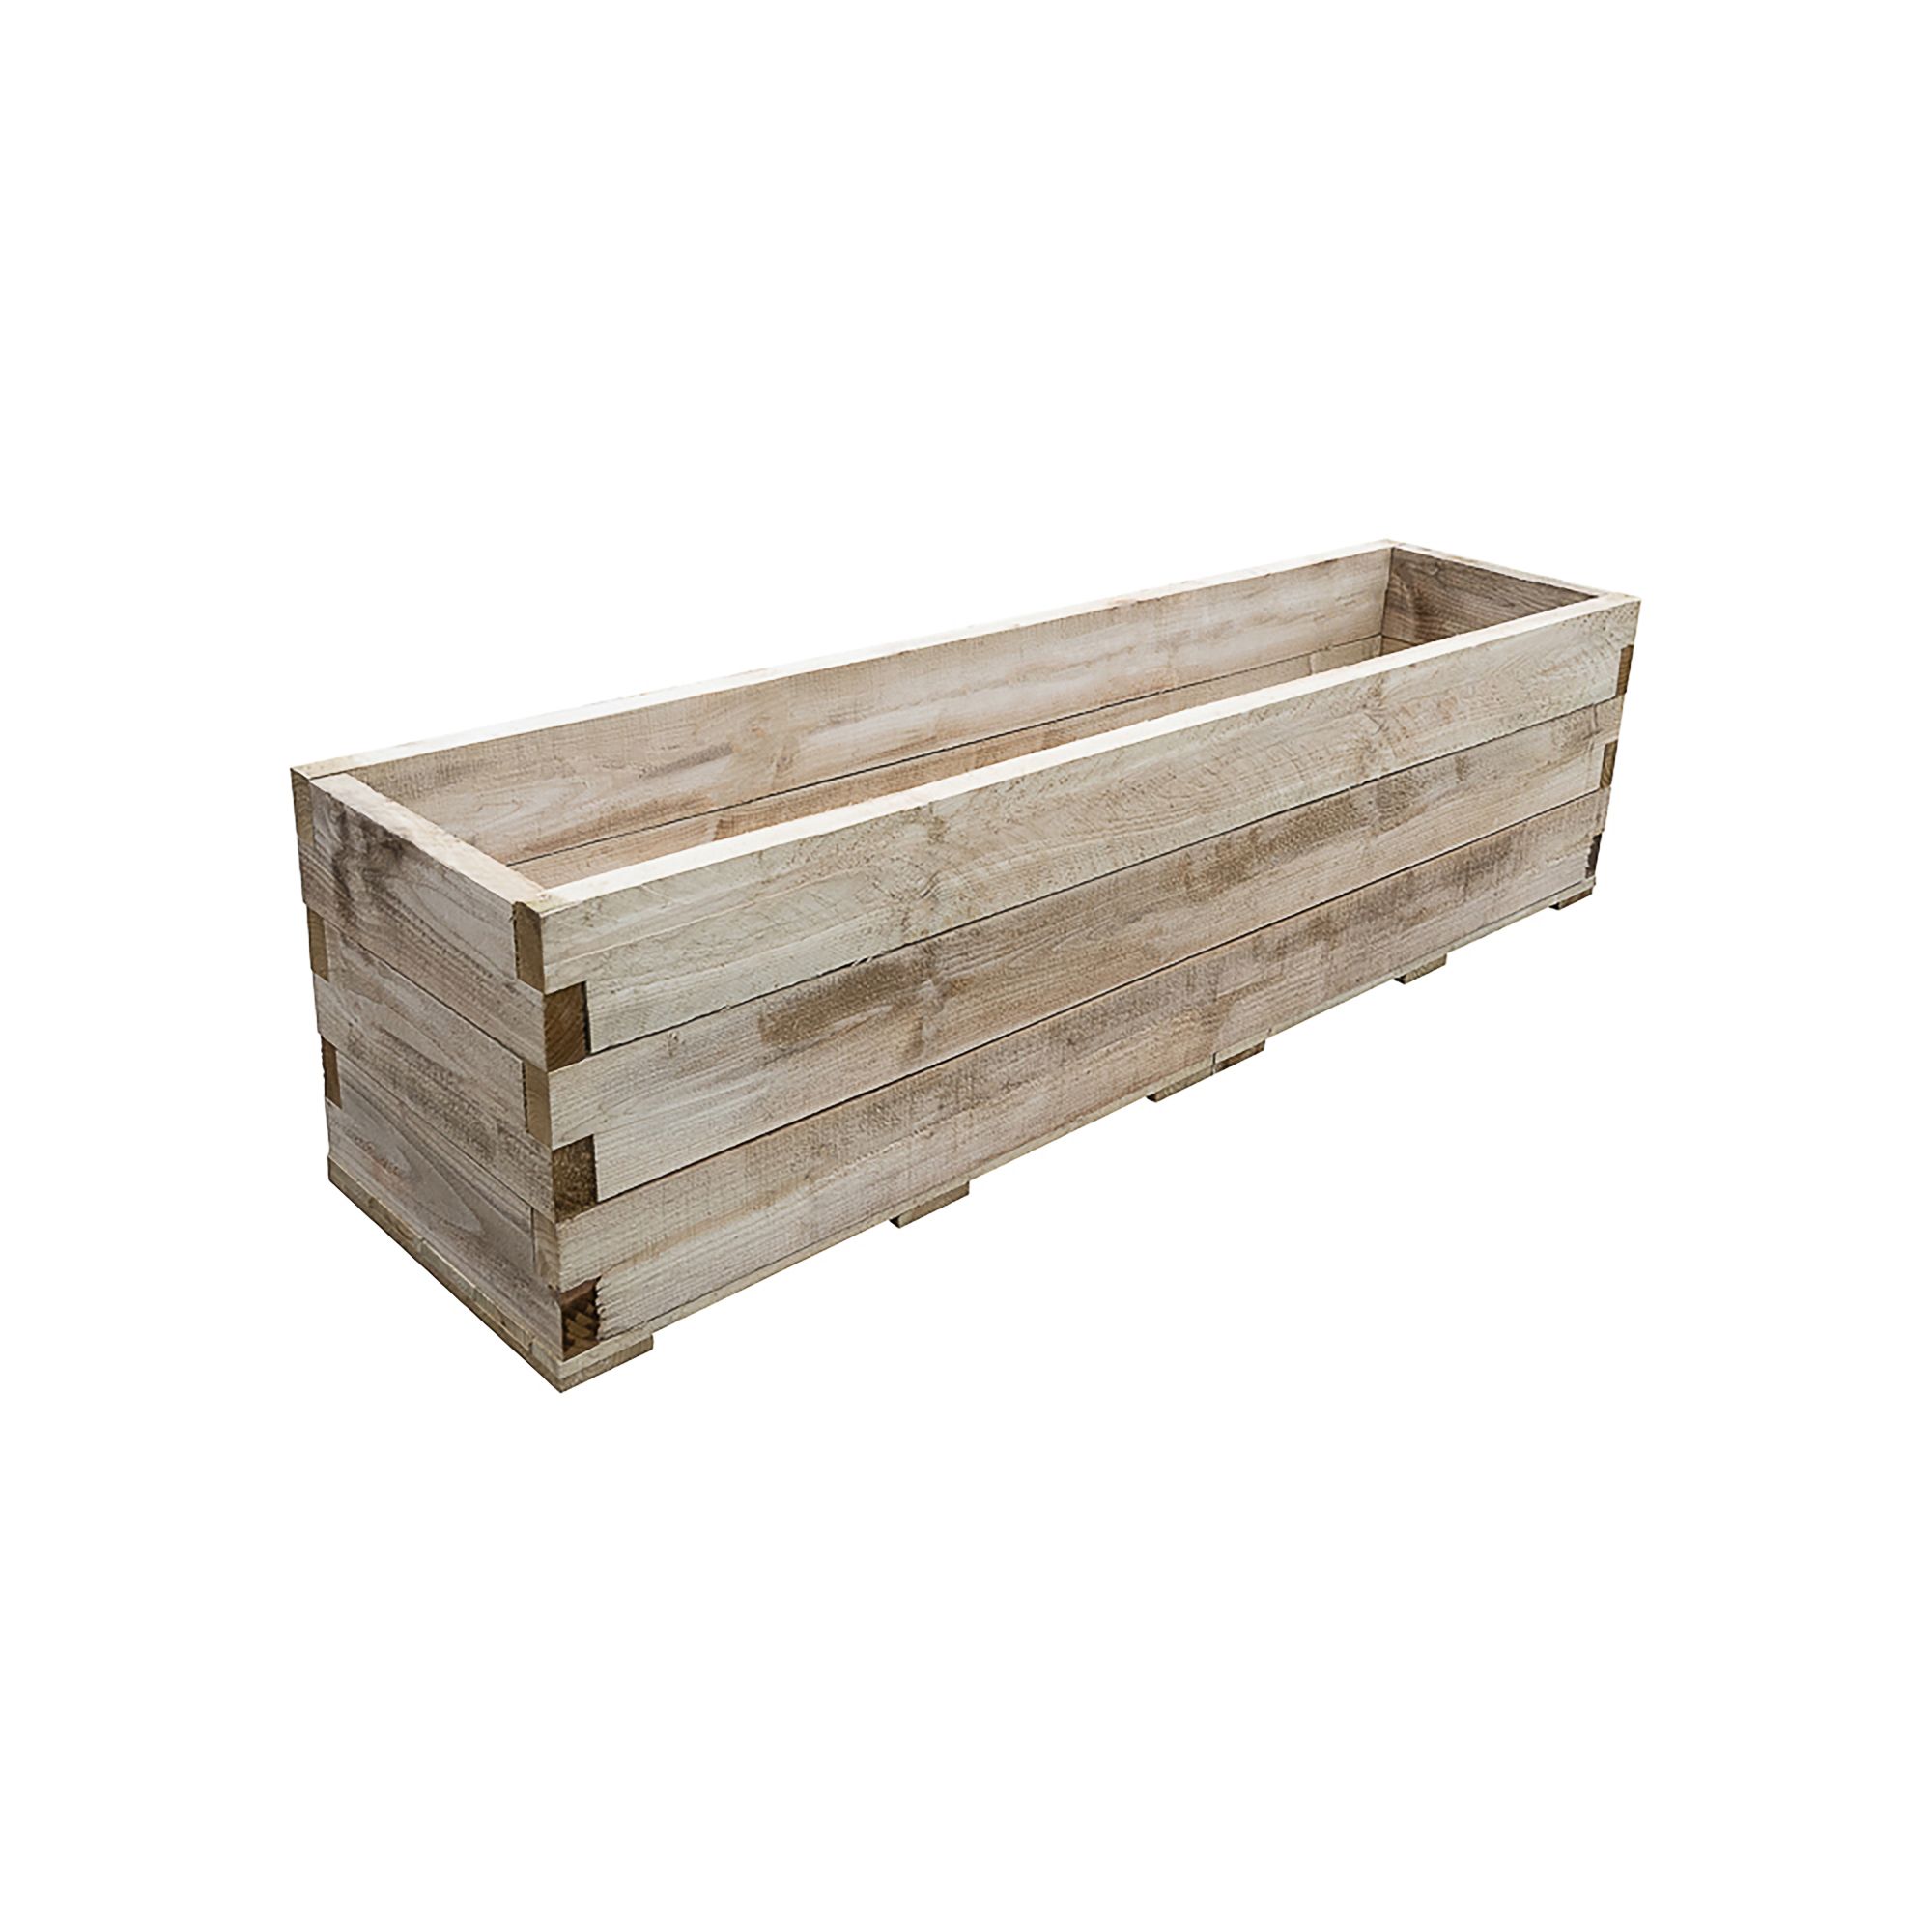 Forest Garden 1.8m x 0.45m Mixed softwood Rectangular Raised bed kit 0.81m²